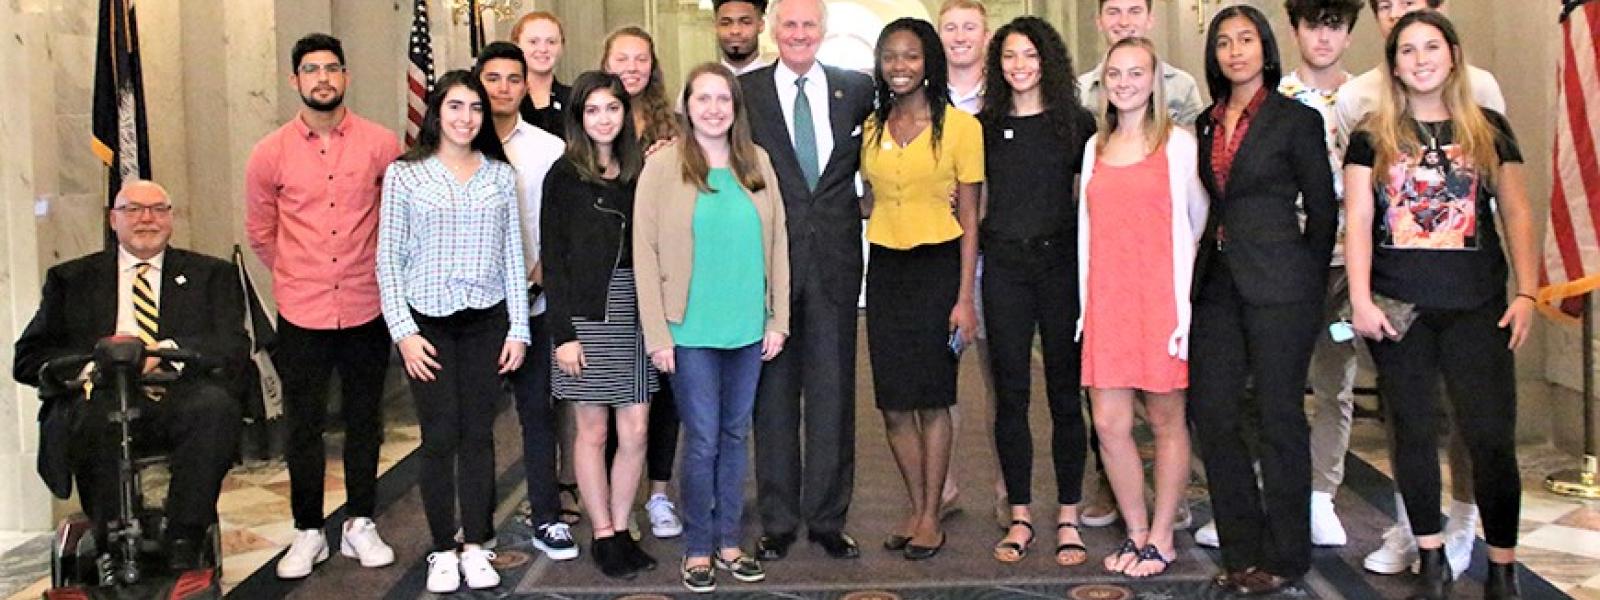 South Carolina Gov. Henry McMaster with the Principles of Leadership and Management class.